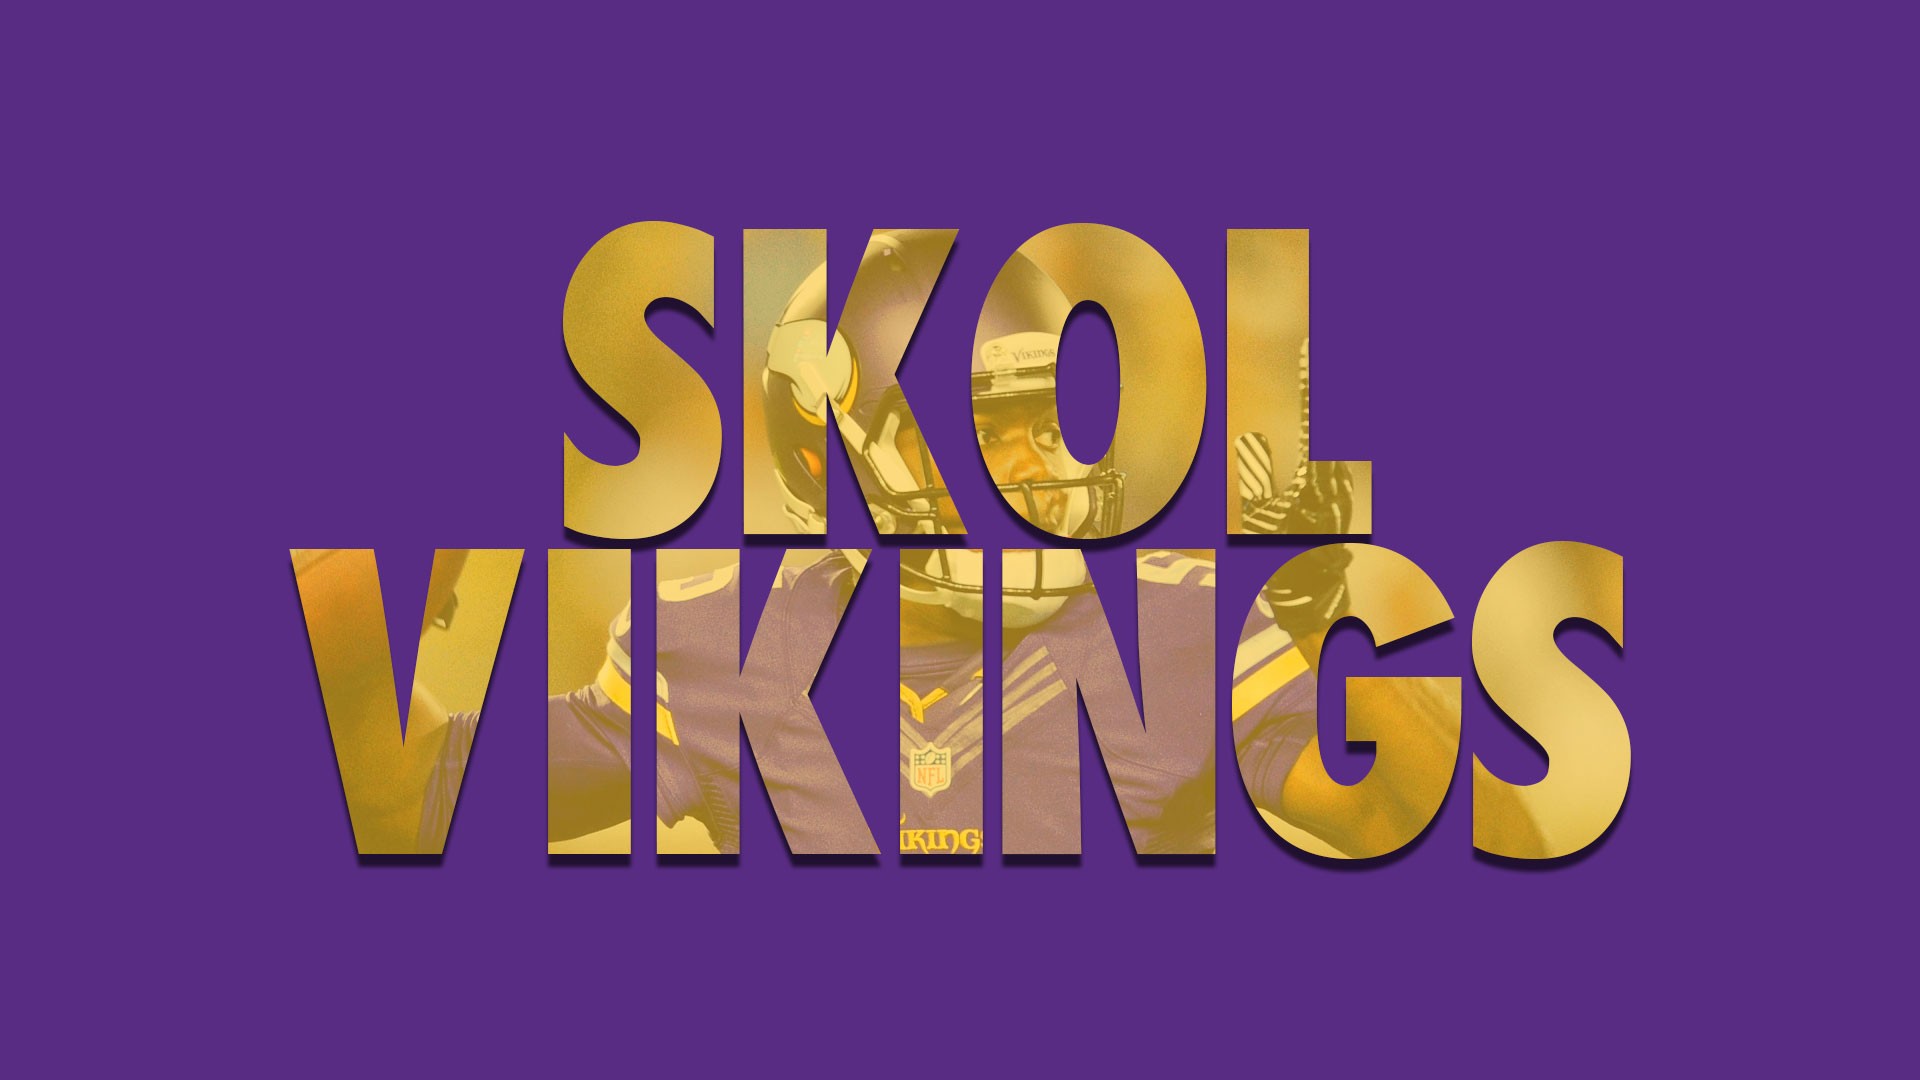 Wallpaper Desktop Minnesota Vikings HD with resolution 1920x1080 pixel. You can make this wallpaper for your Mac or Windows Desktop Background, iPhone, Android or Tablet and another Smartphone device